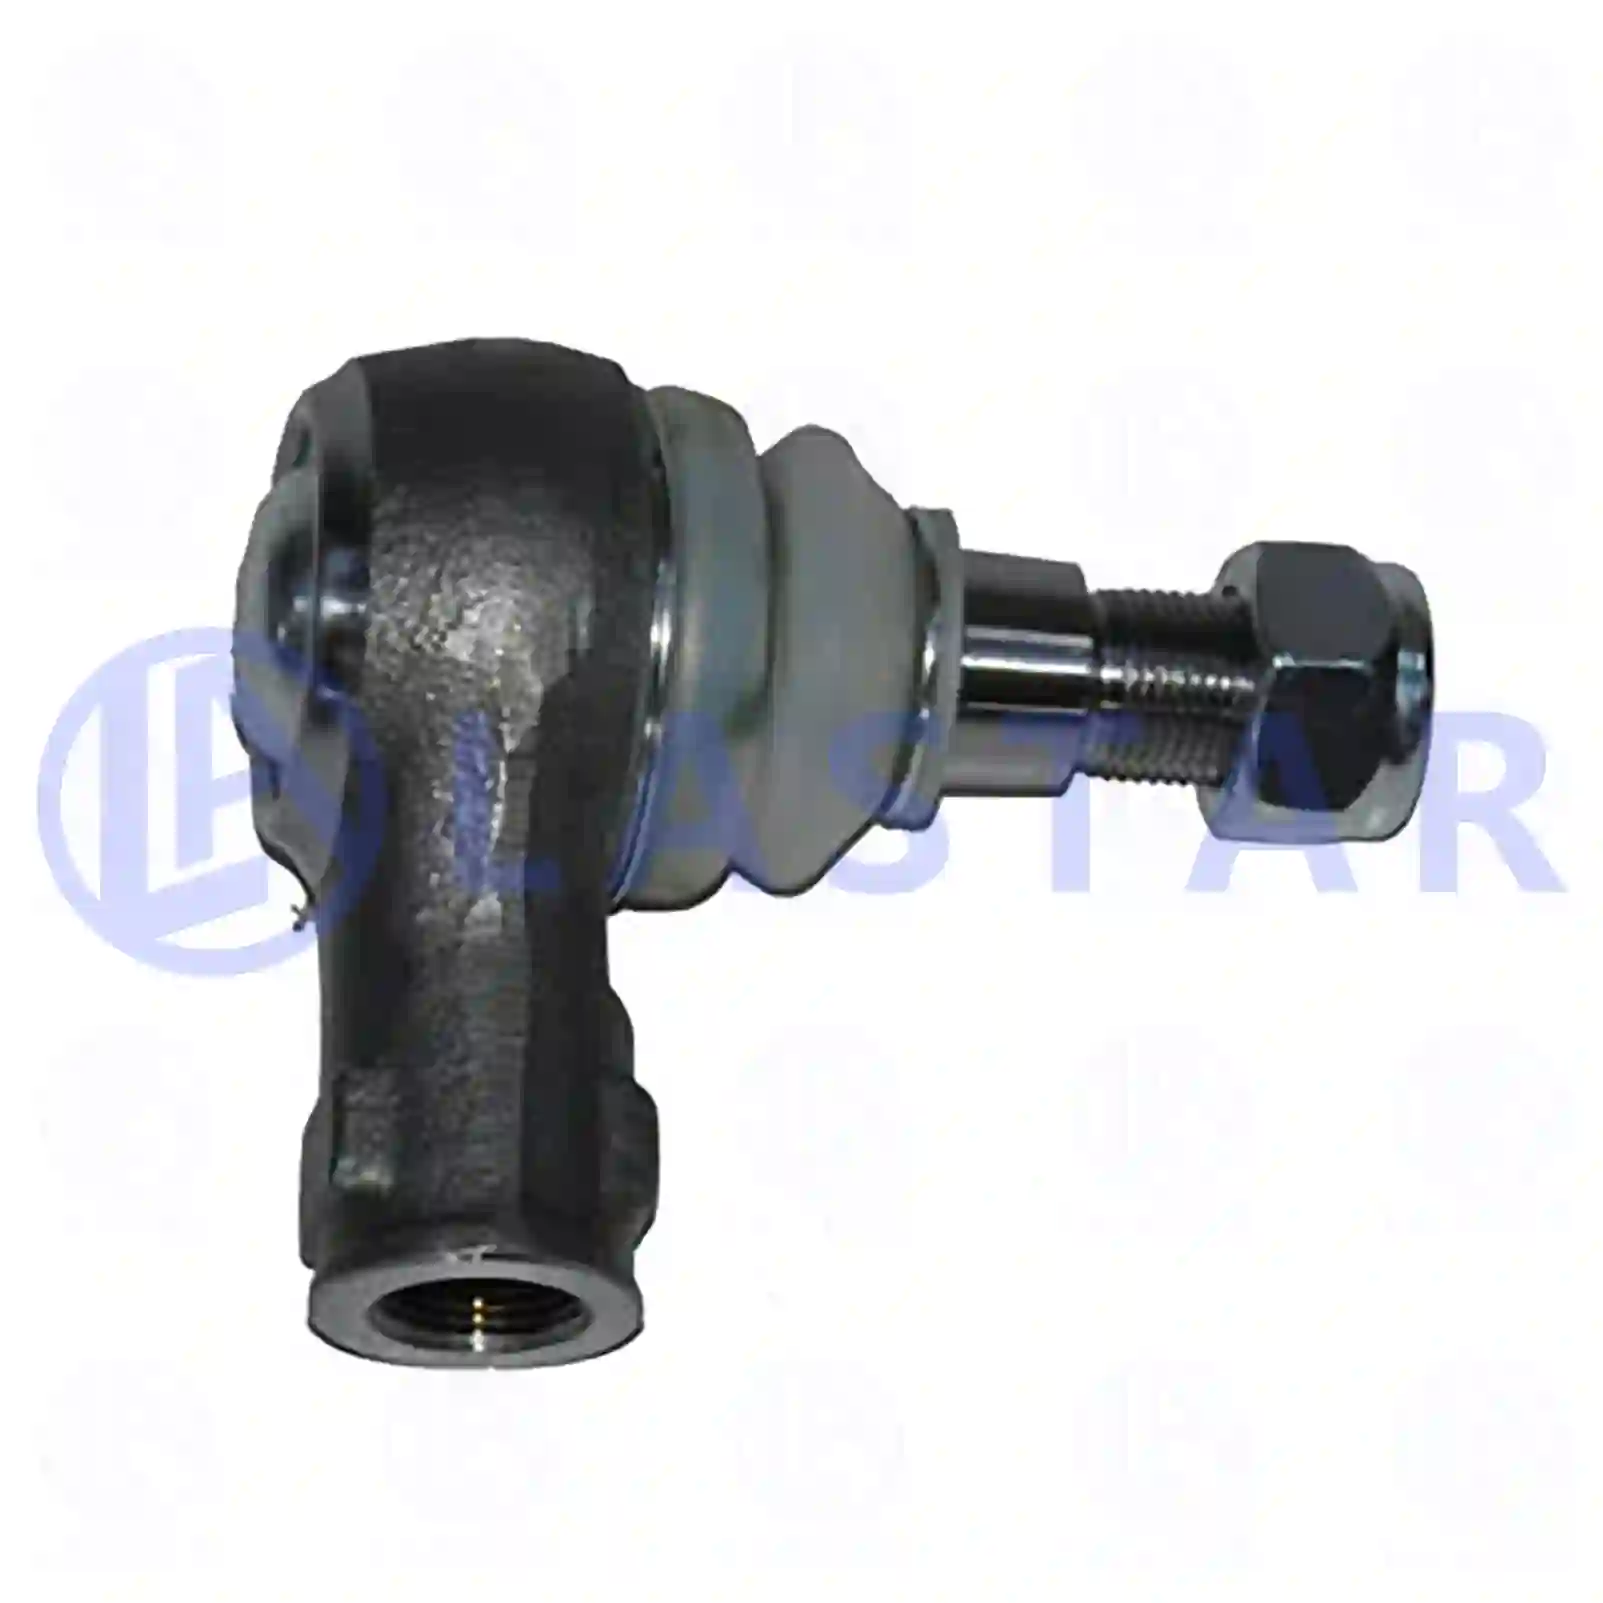 Ball joint, right hand thread, 77705282, 93802209, 08585748, 08585749, 08586765, 08586766, 500310933, 503643348, 93802209, 93804060, ZG40412-0008 ||  77705282 Lastar Spare Part | Truck Spare Parts, Auotomotive Spare Parts Ball joint, right hand thread, 77705282, 93802209, 08585748, 08585749, 08586765, 08586766, 500310933, 503643348, 93802209, 93804060, ZG40412-0008 ||  77705282 Lastar Spare Part | Truck Spare Parts, Auotomotive Spare Parts